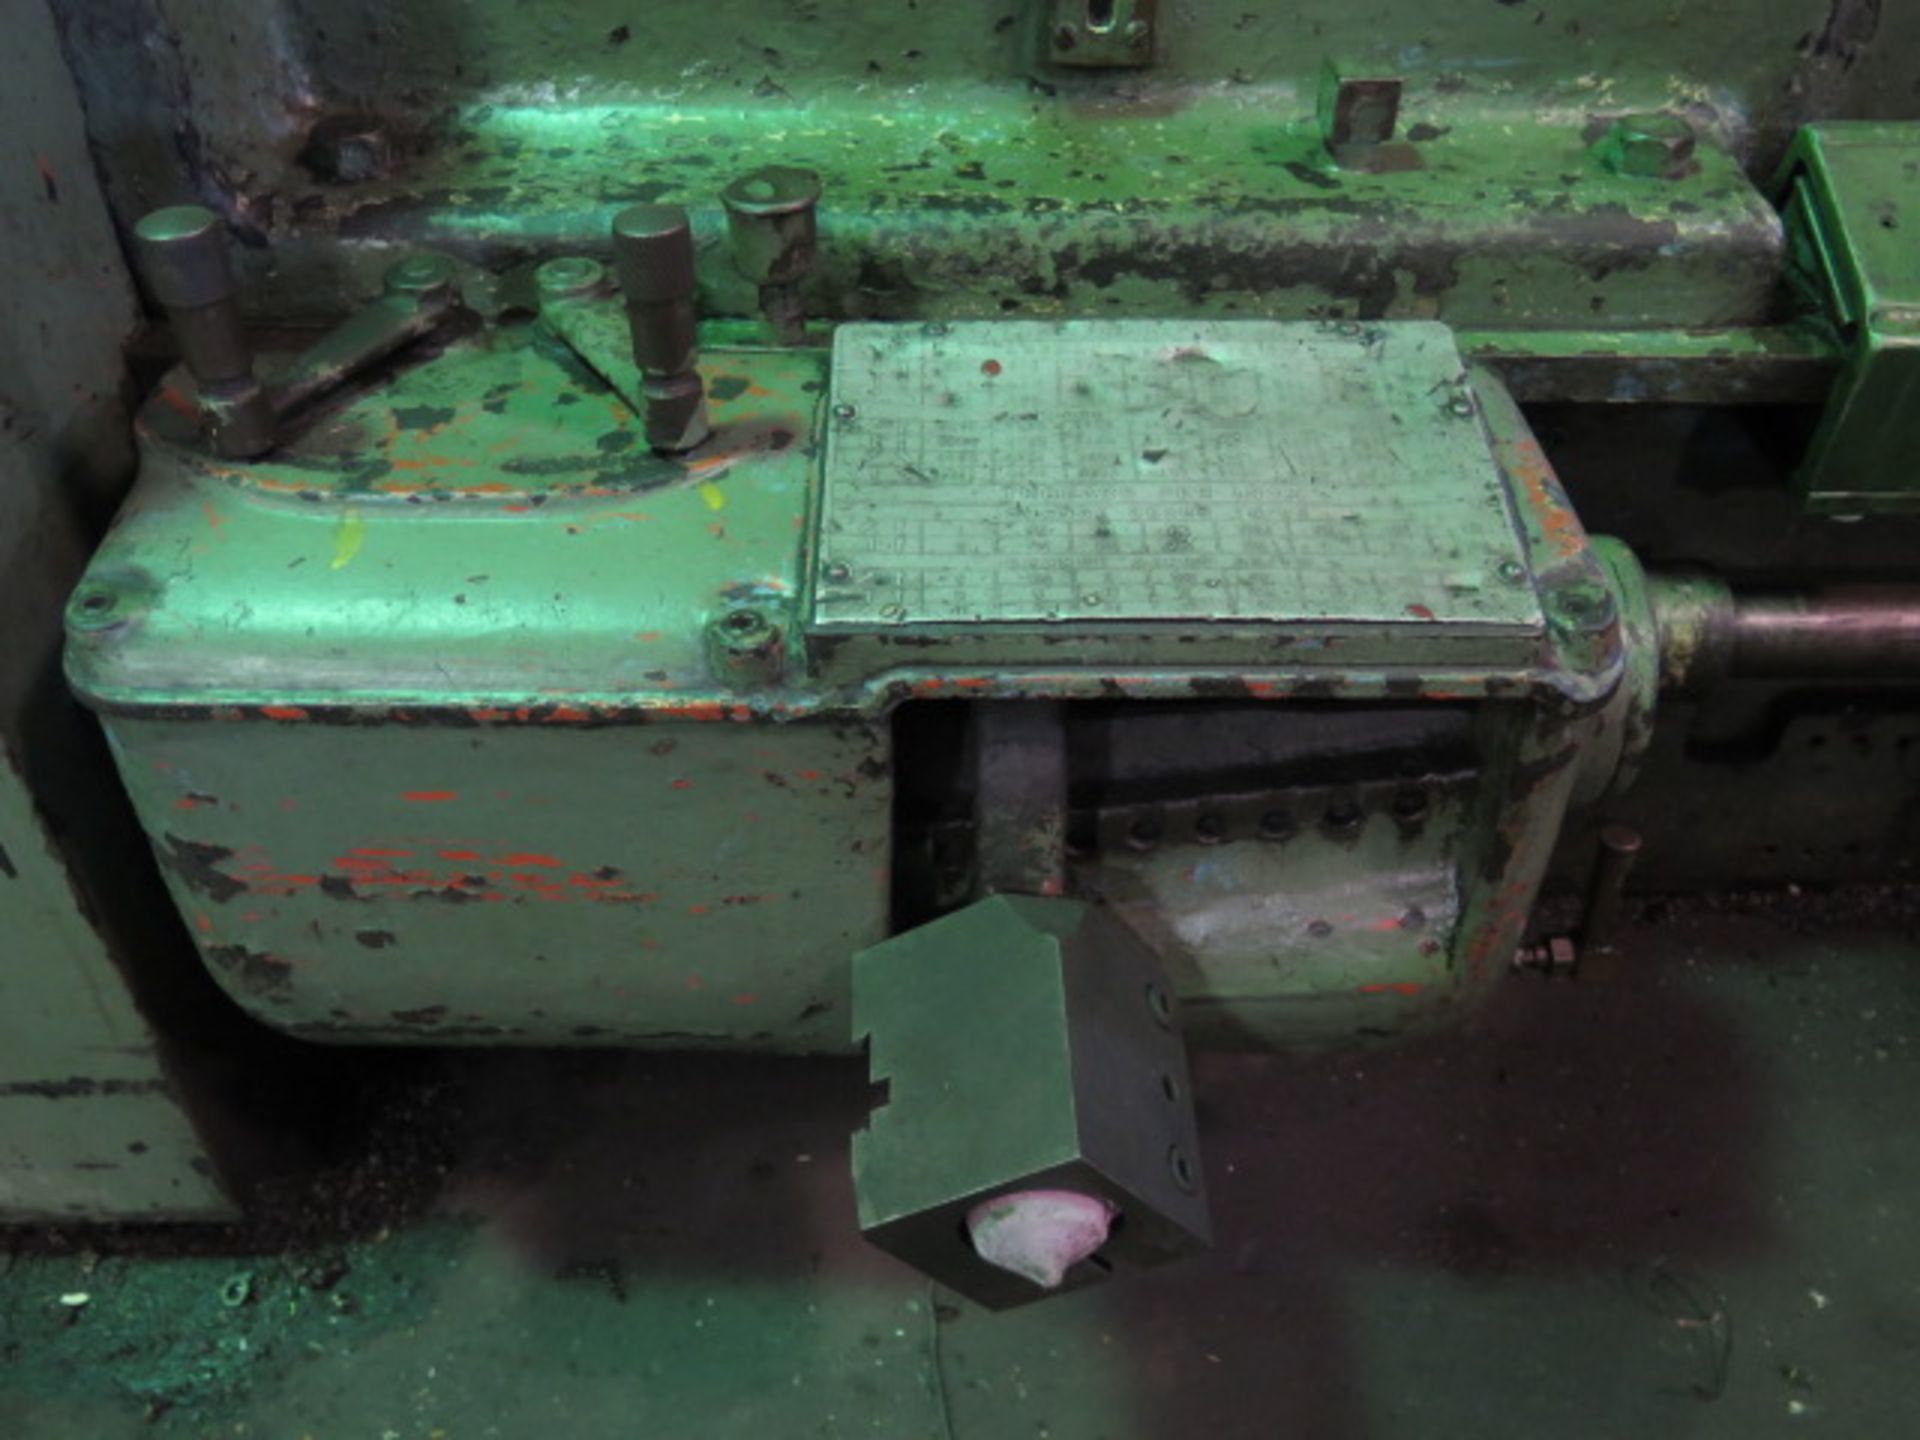 Niles A54P 62” x 140” Lathe s/n 23579 w/ 3.94-232 RPM, Inch Threading, Steady Rest, SOLD AS IS - Image 10 of 20